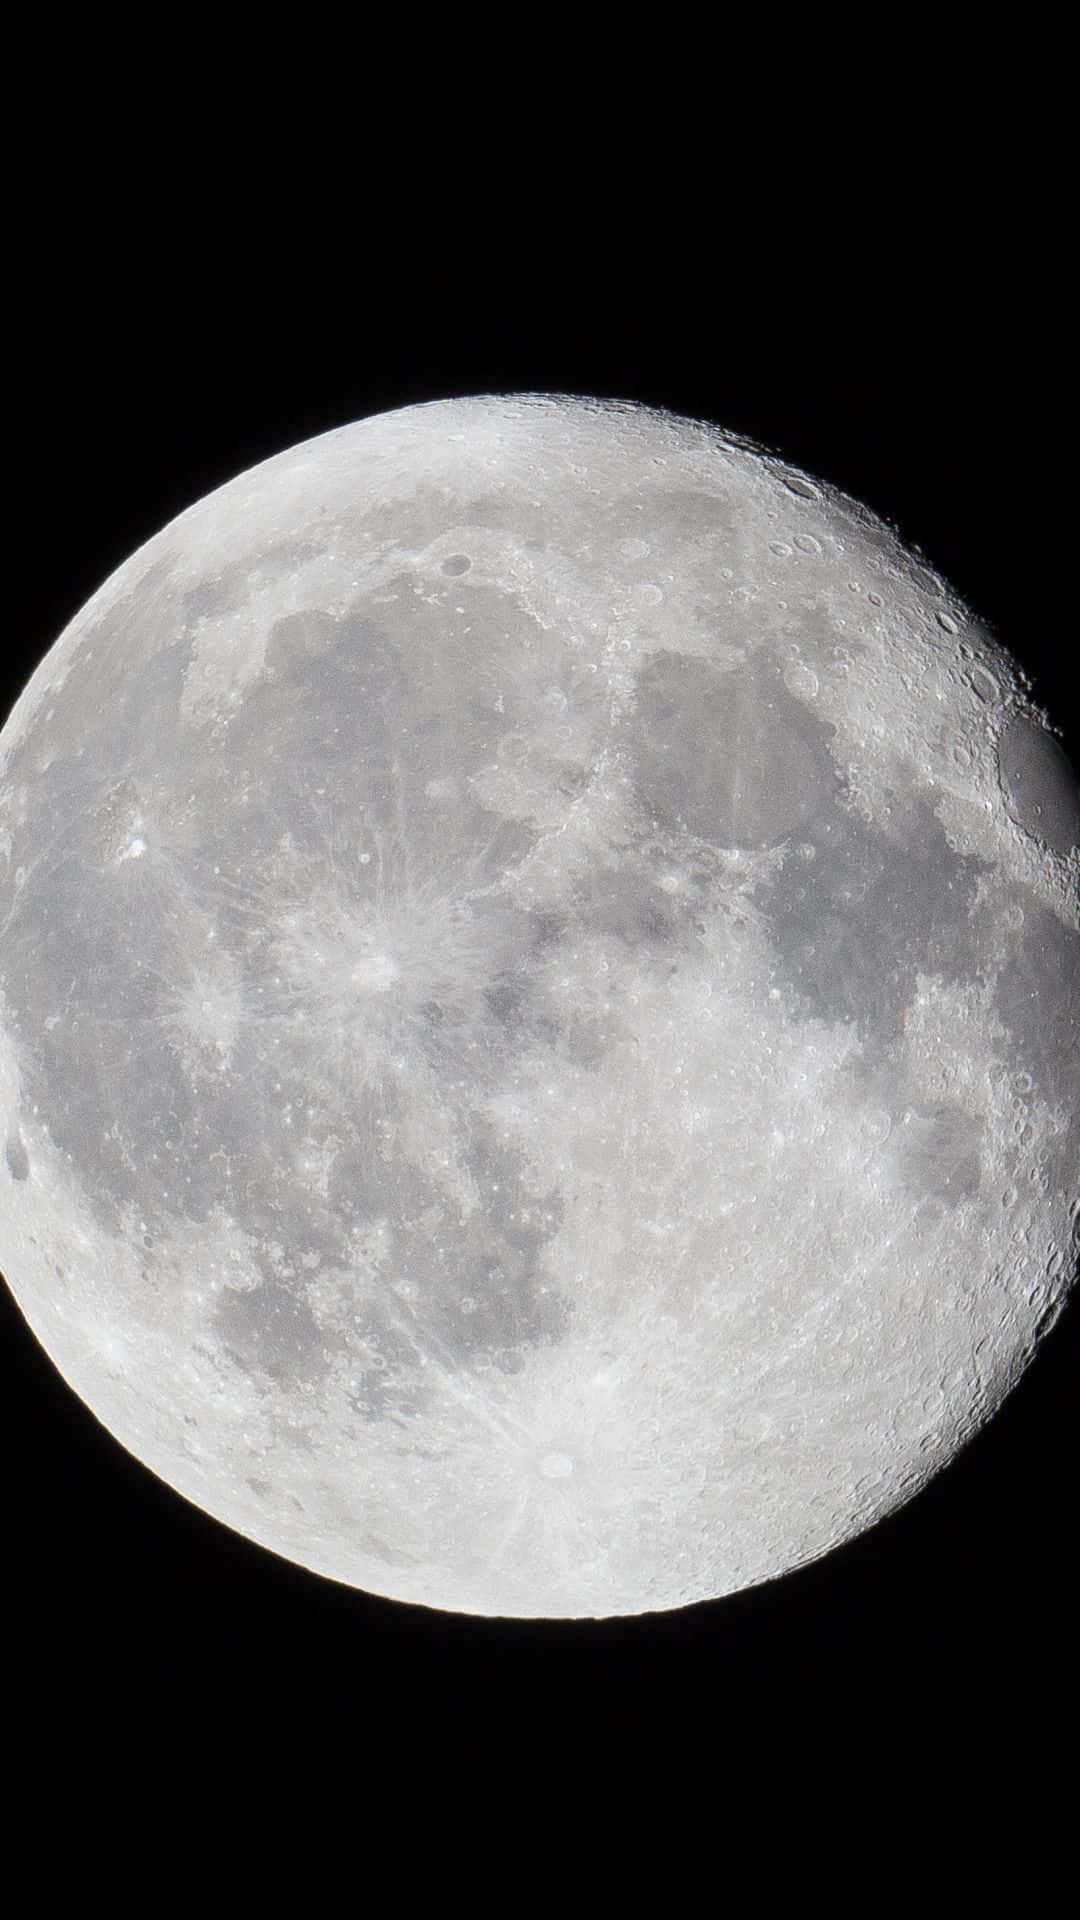 Get Closer to the Moon With the Latest Iphone Wallpaper